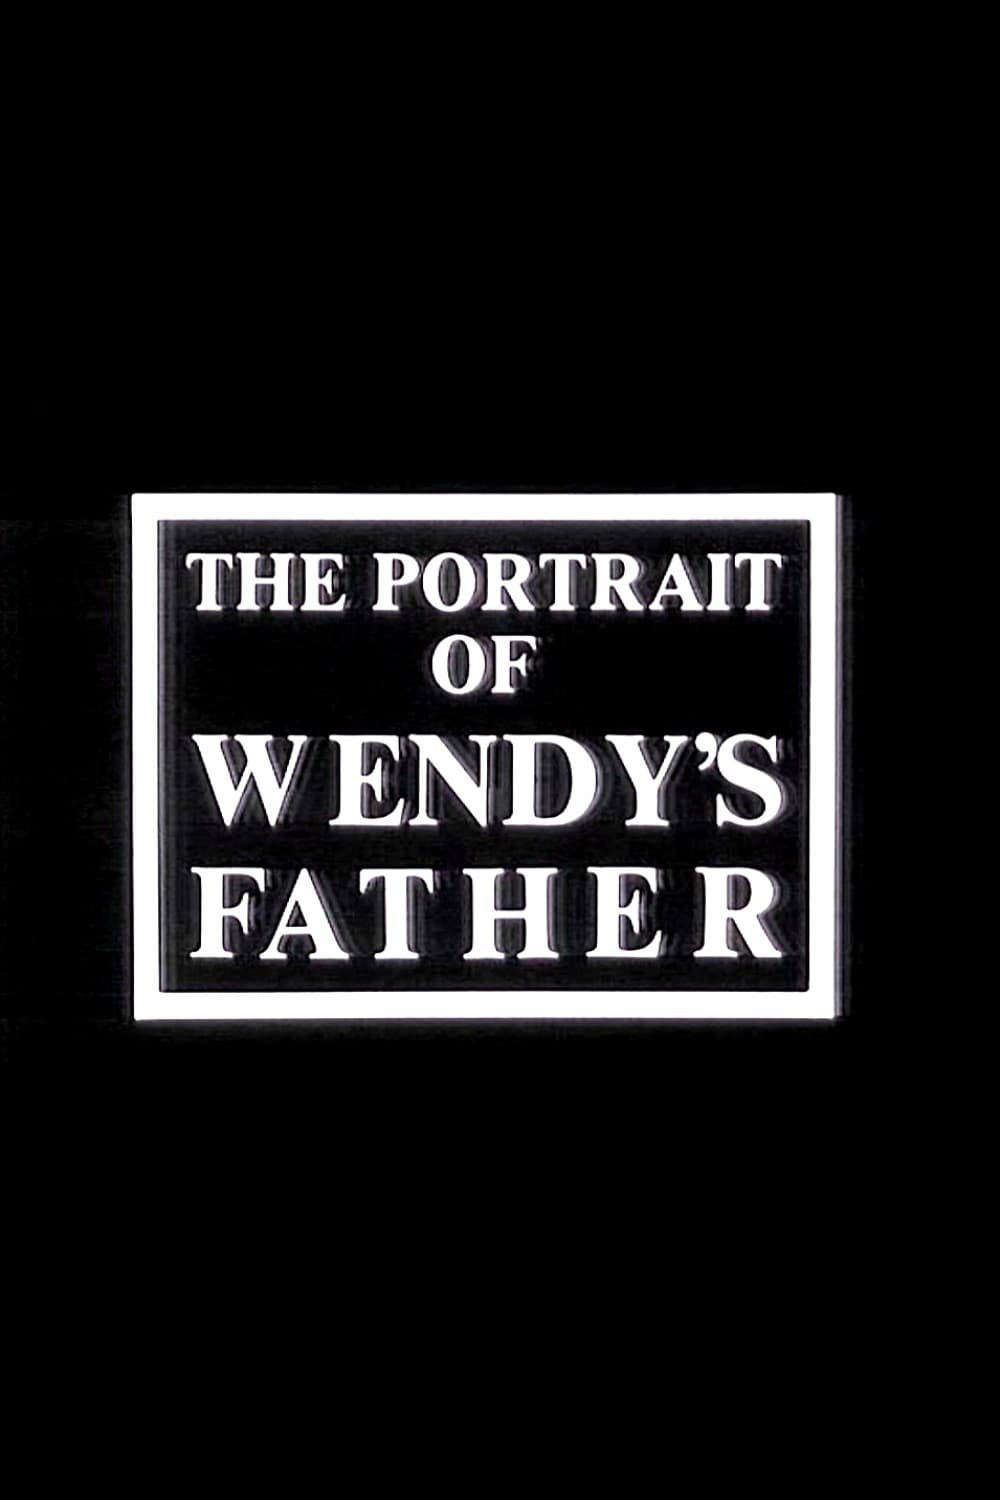 The Portrait of Wendy's Father